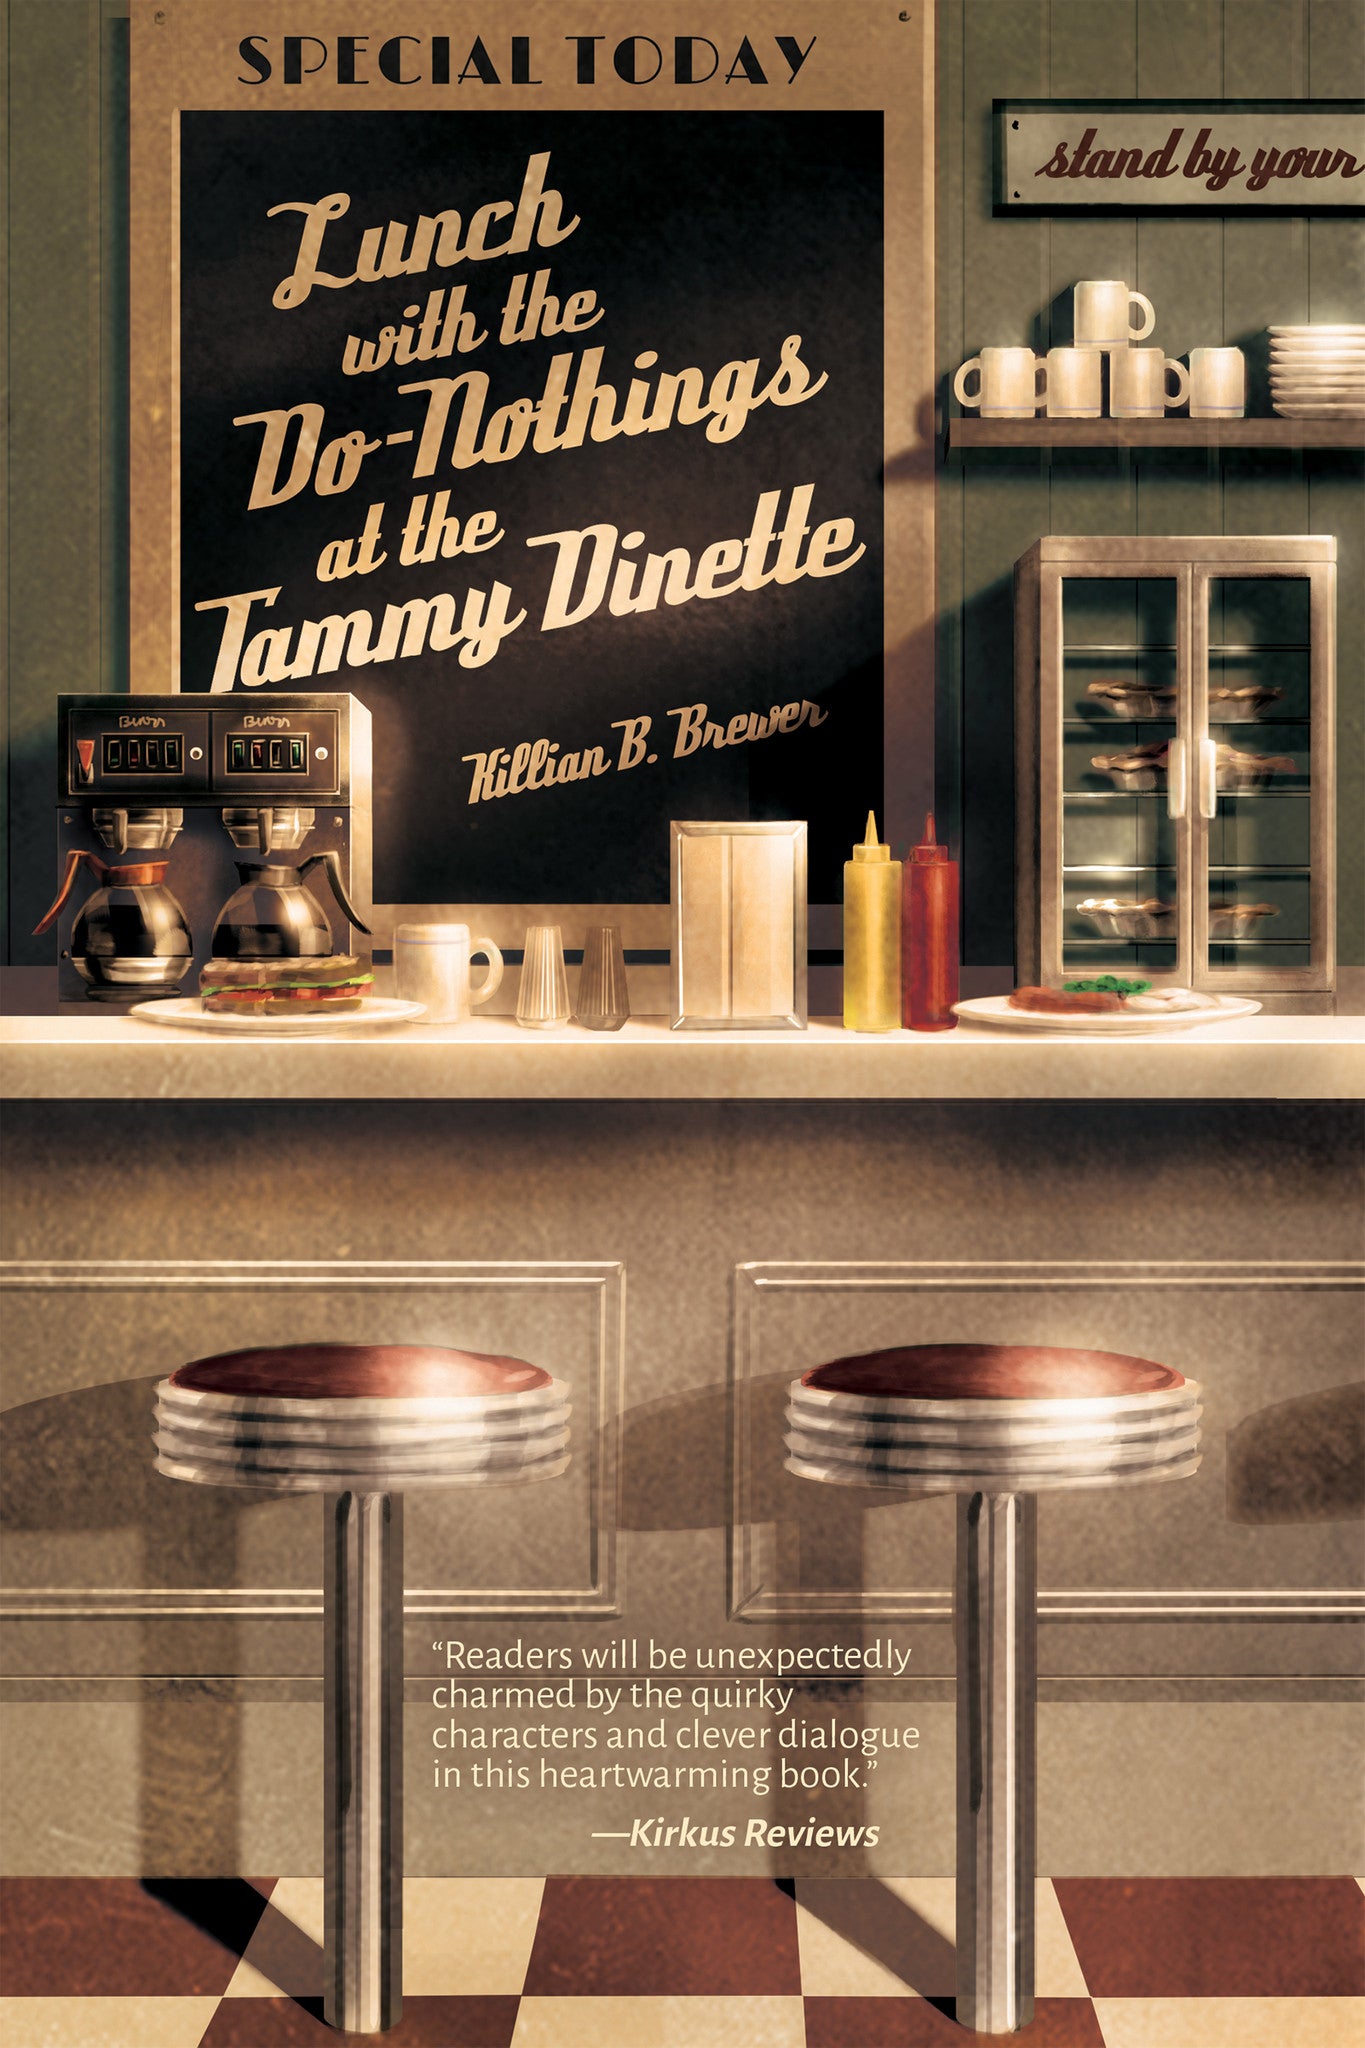 Lunch with the Do-Nothings at the Tammy Dinette (eBook package)